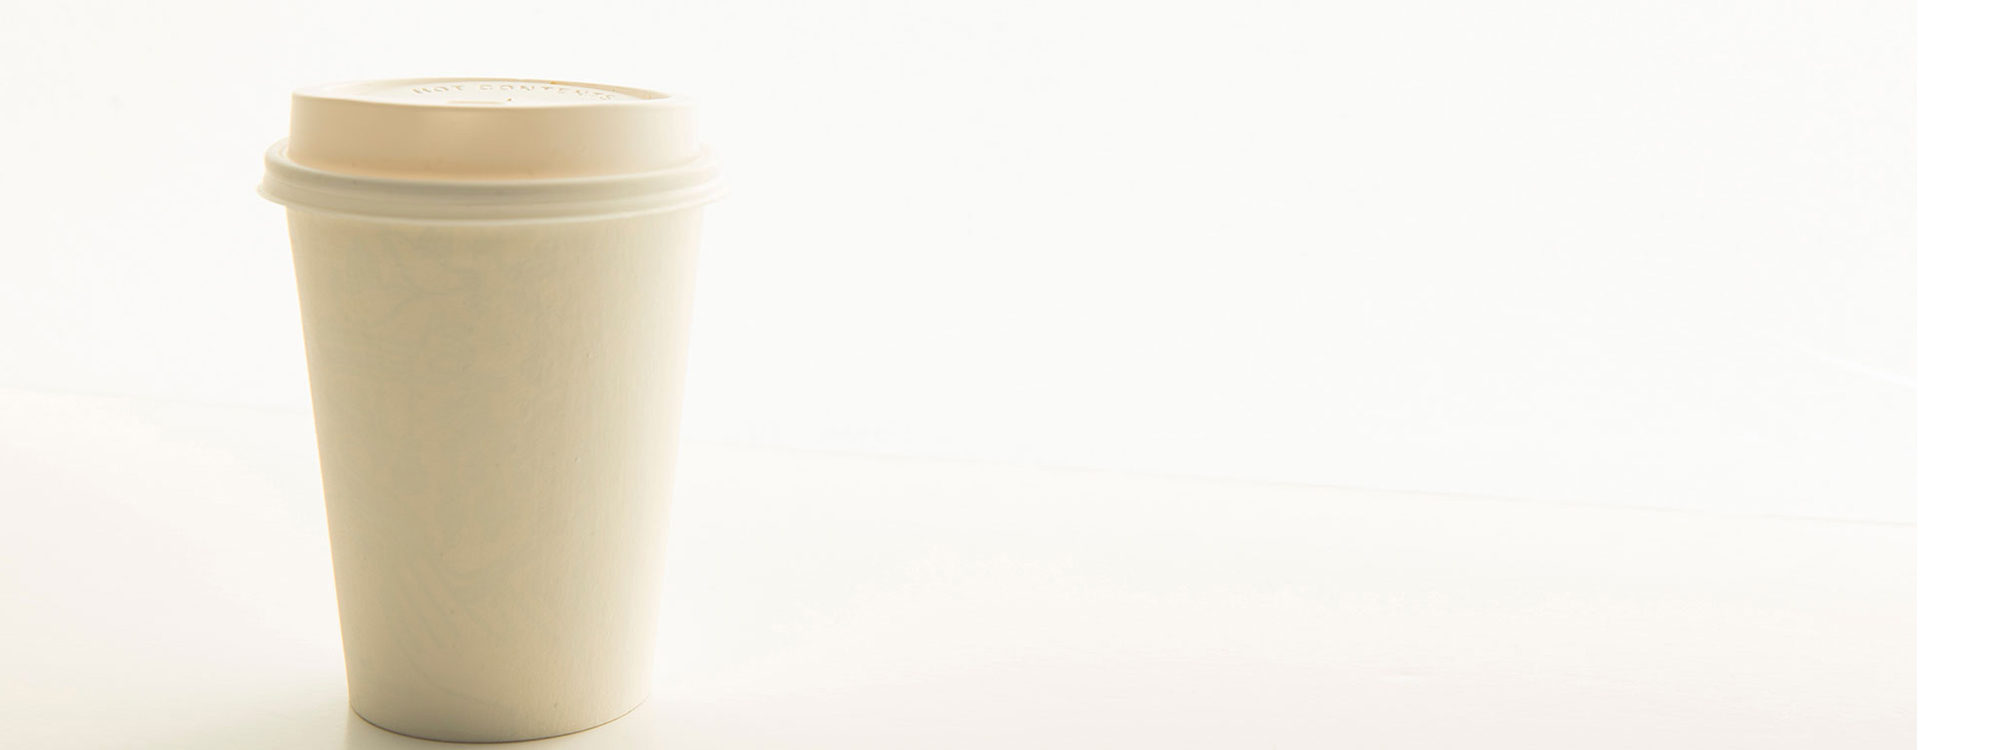 Post-Consumer Paper Cup